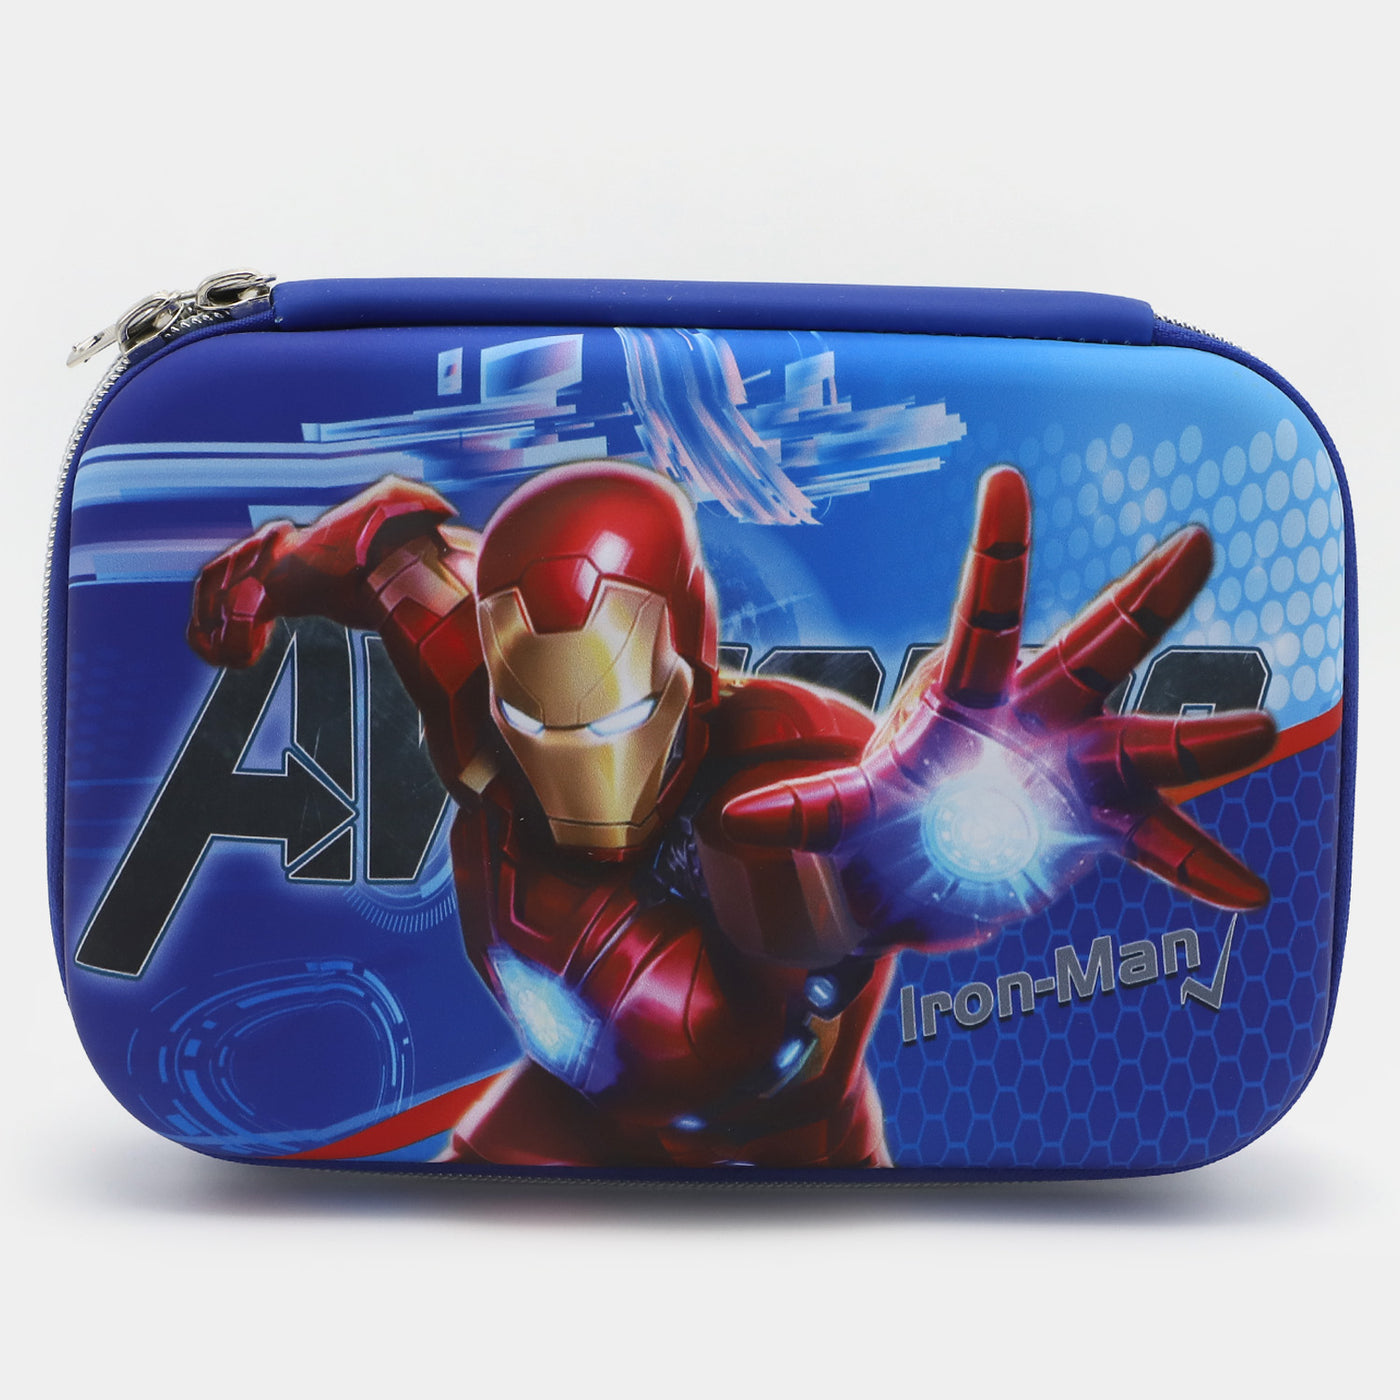 Action Hero Pencil Pouch/Case For Kids